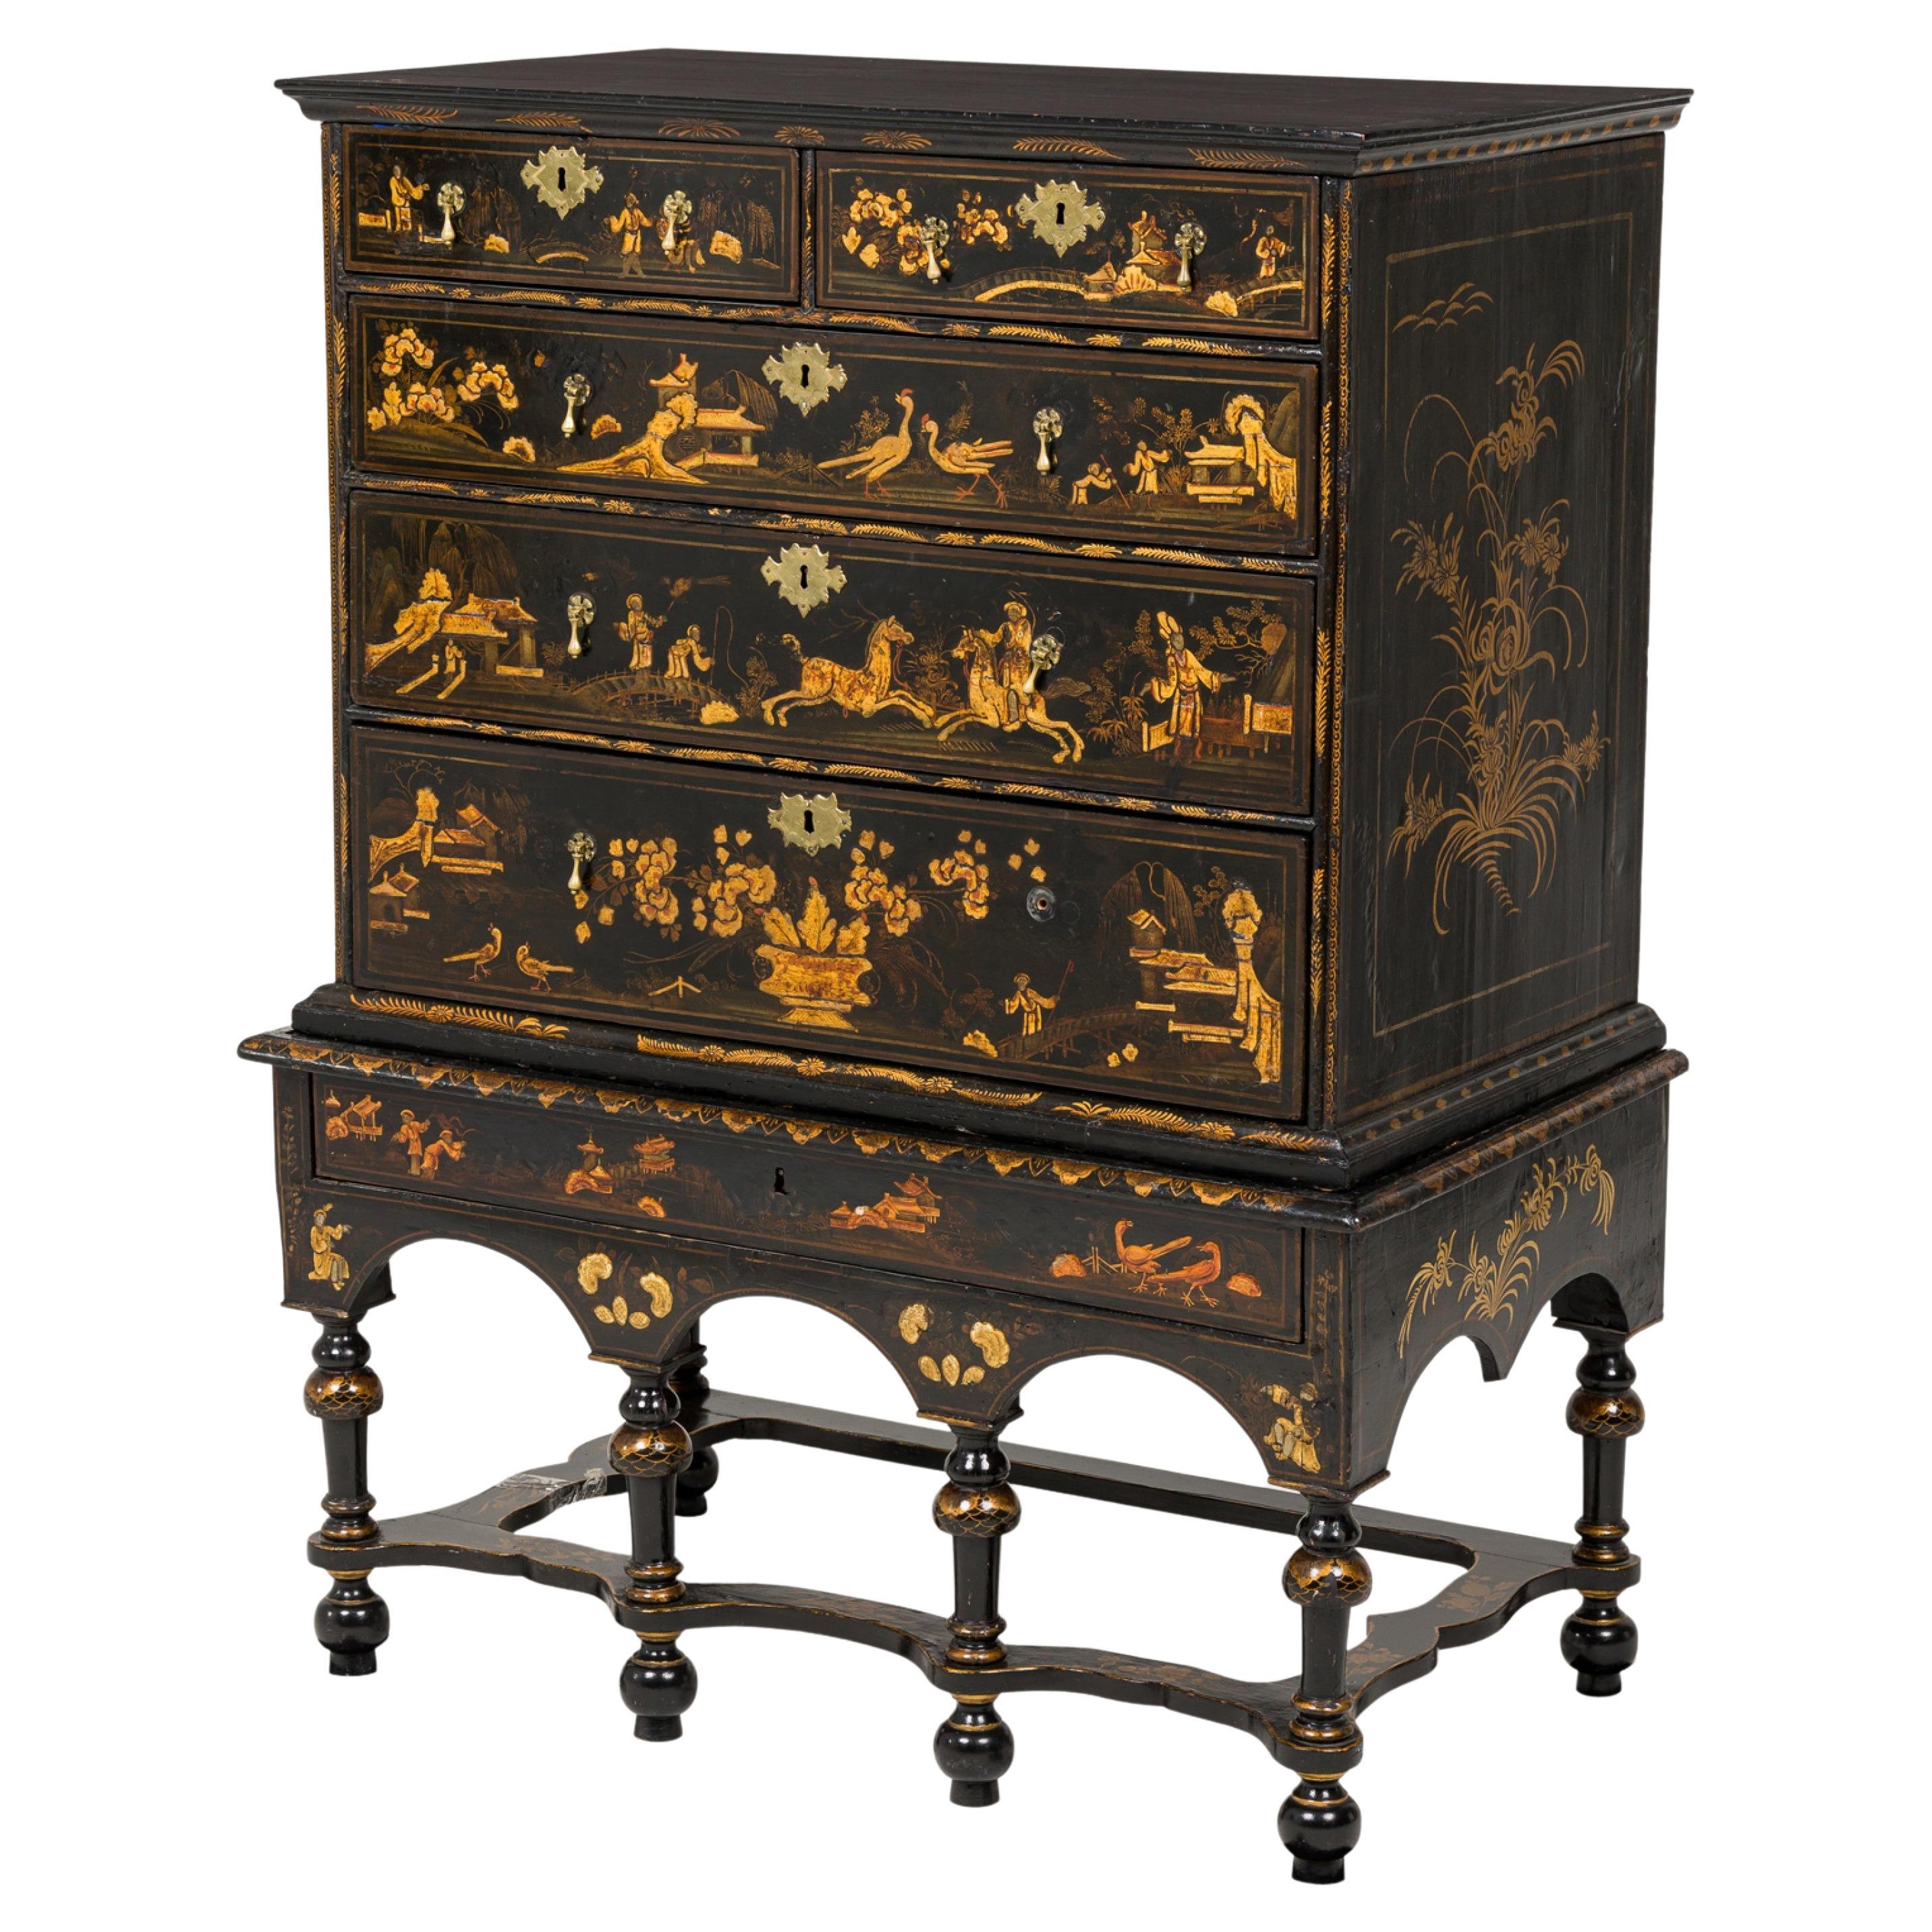 Commode haute anglaise style chinoiseries en vente